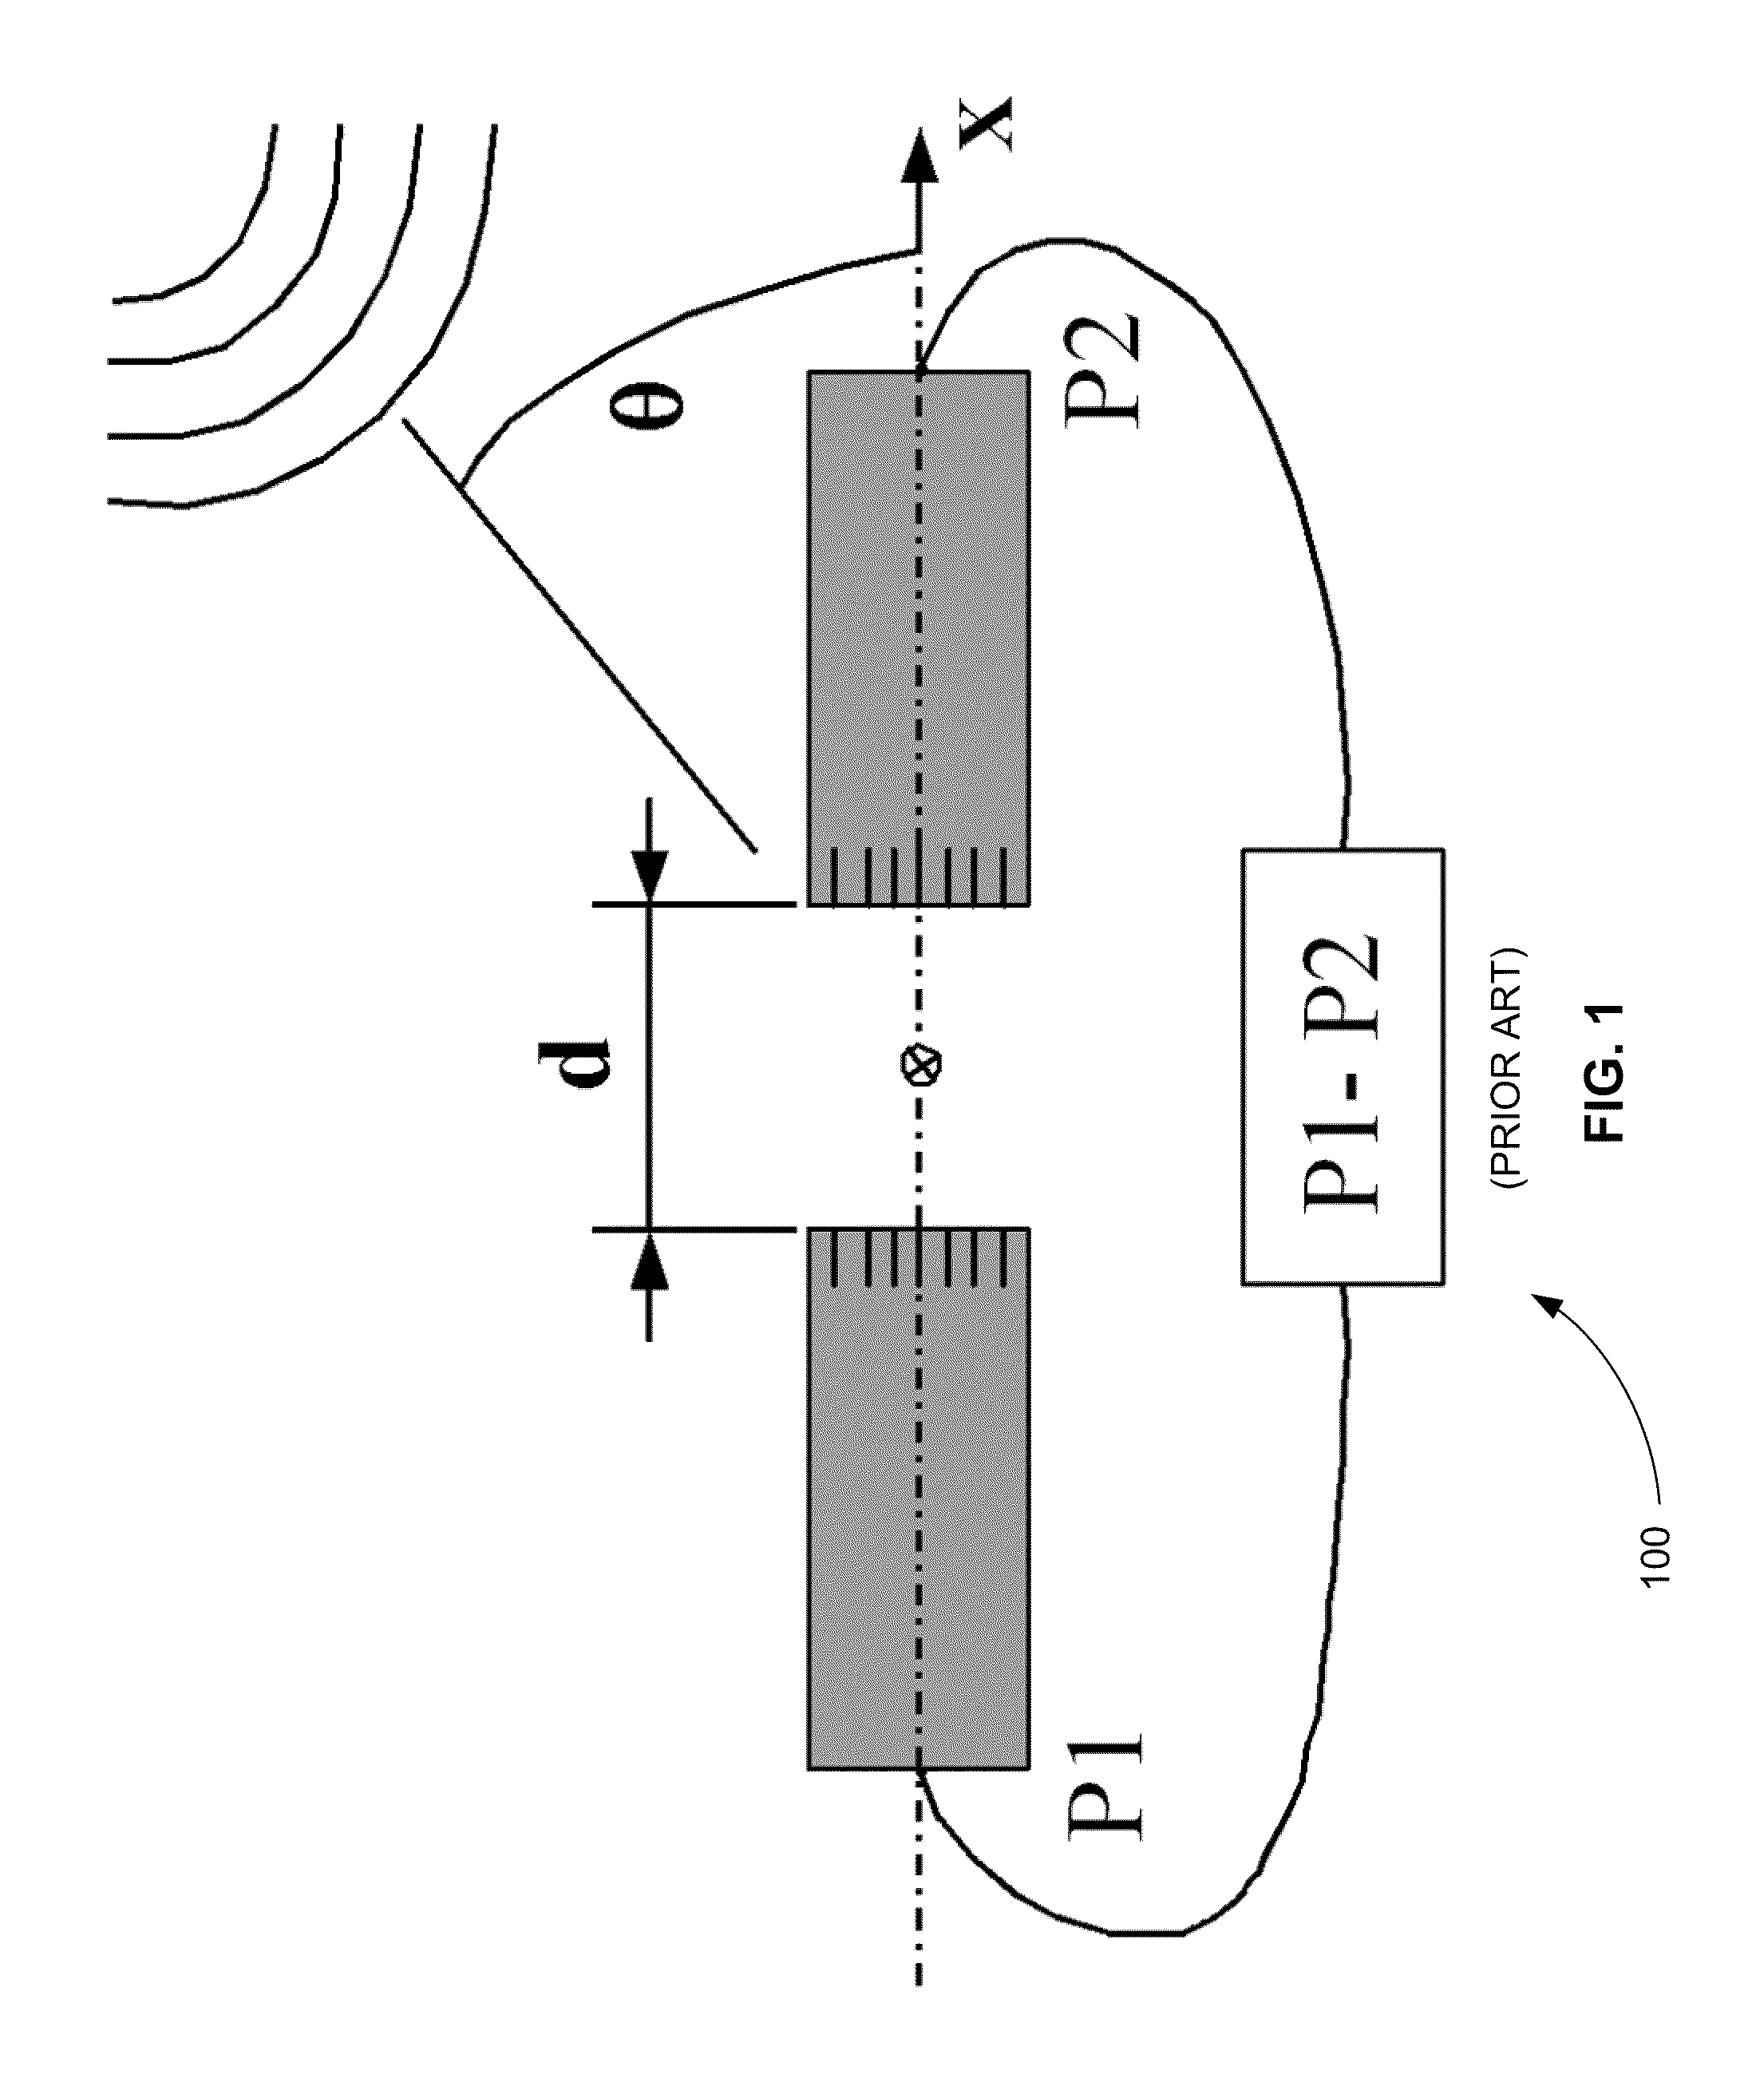 Acoustic velocity microphone using a buoyant object